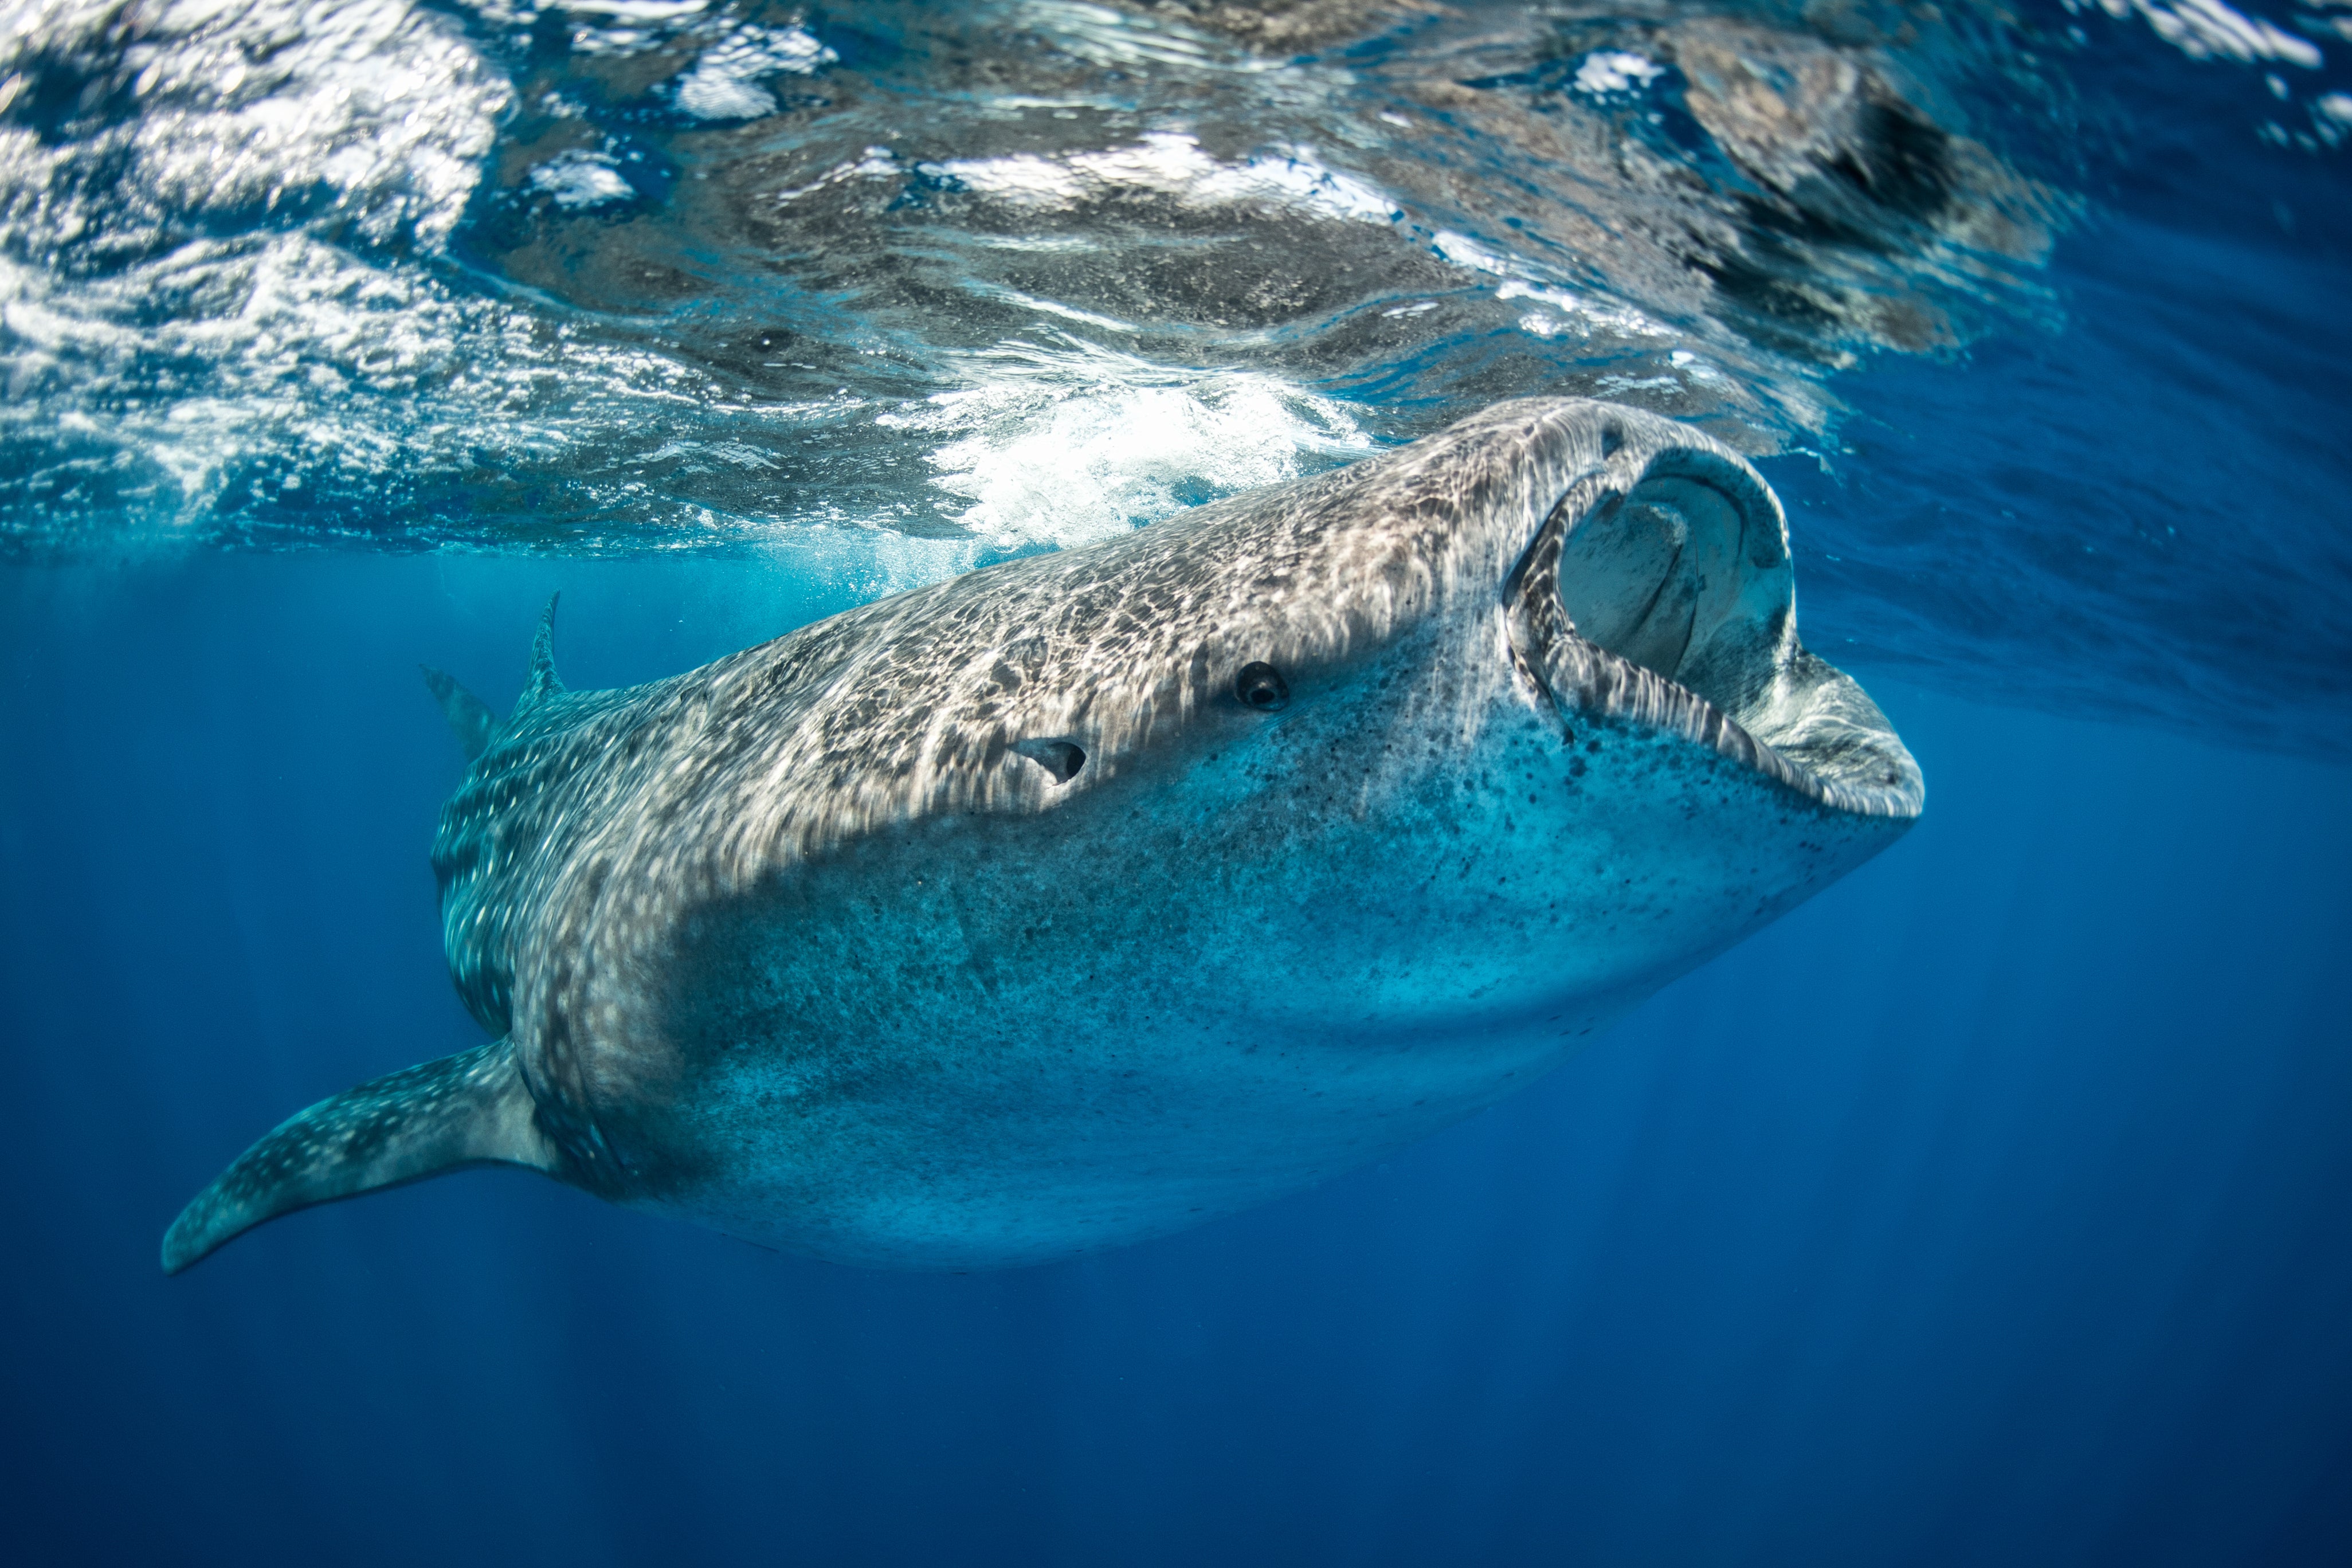 Whale sharks are an endangered species and the world’s largest fish